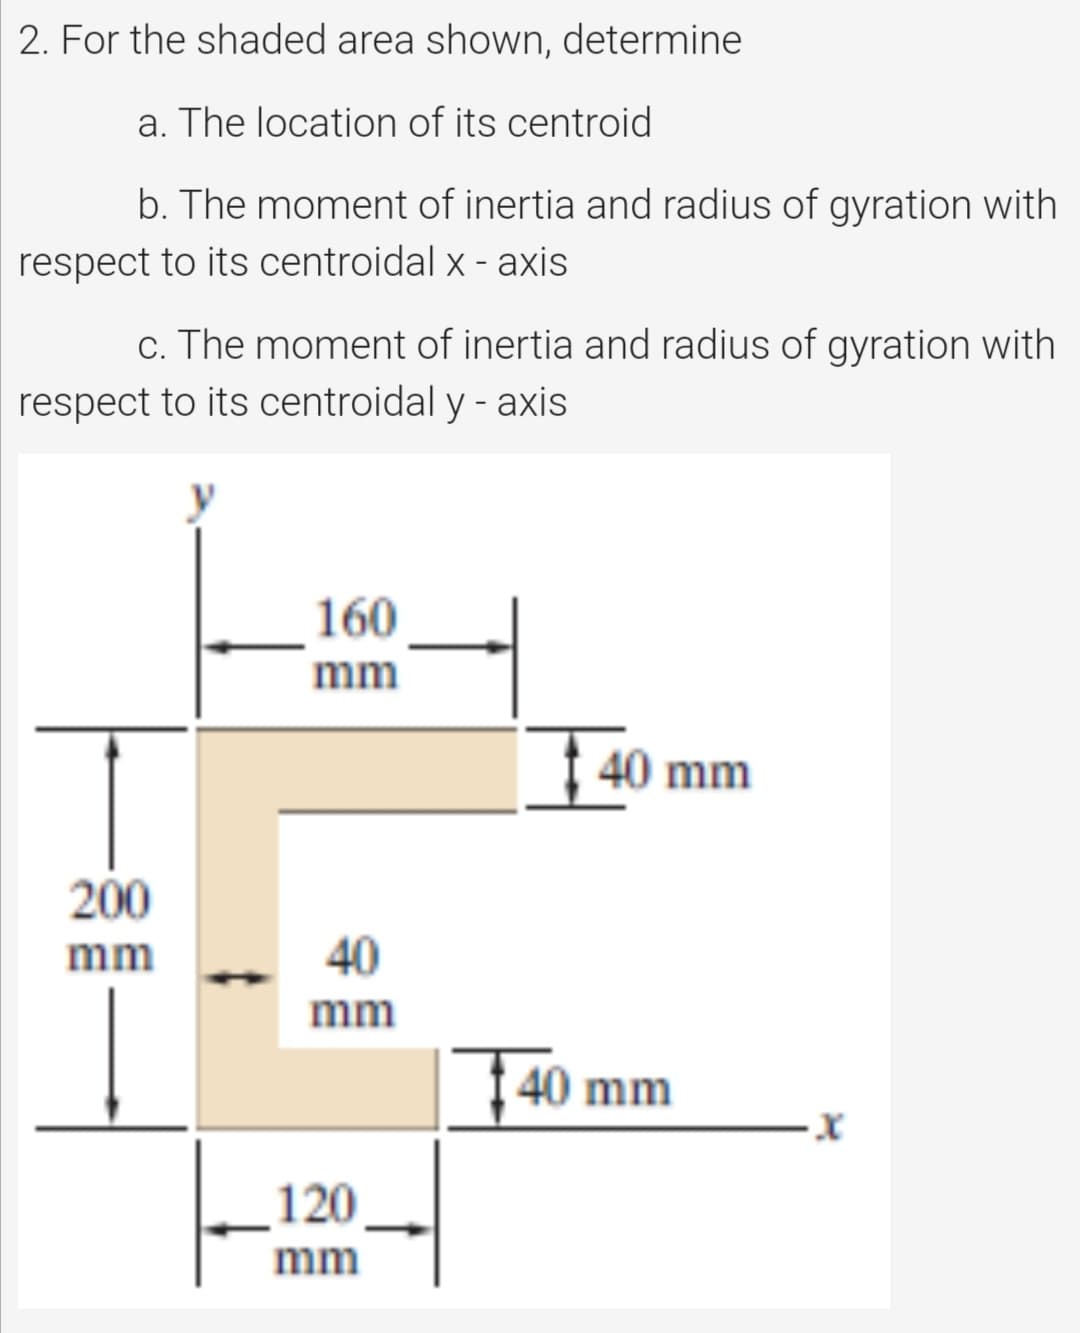 2. For the shaded area shown, determine
a. The location of its centroid
b. The moment of inertia and radius of gyration with
respect to its centroidal x - axis
c. The moment of inertia and radius of gyration with
respect to its centroidal y - axis
160
mm
| 40 mm
200
mm
40
mm
1 40 mm
120
mm
